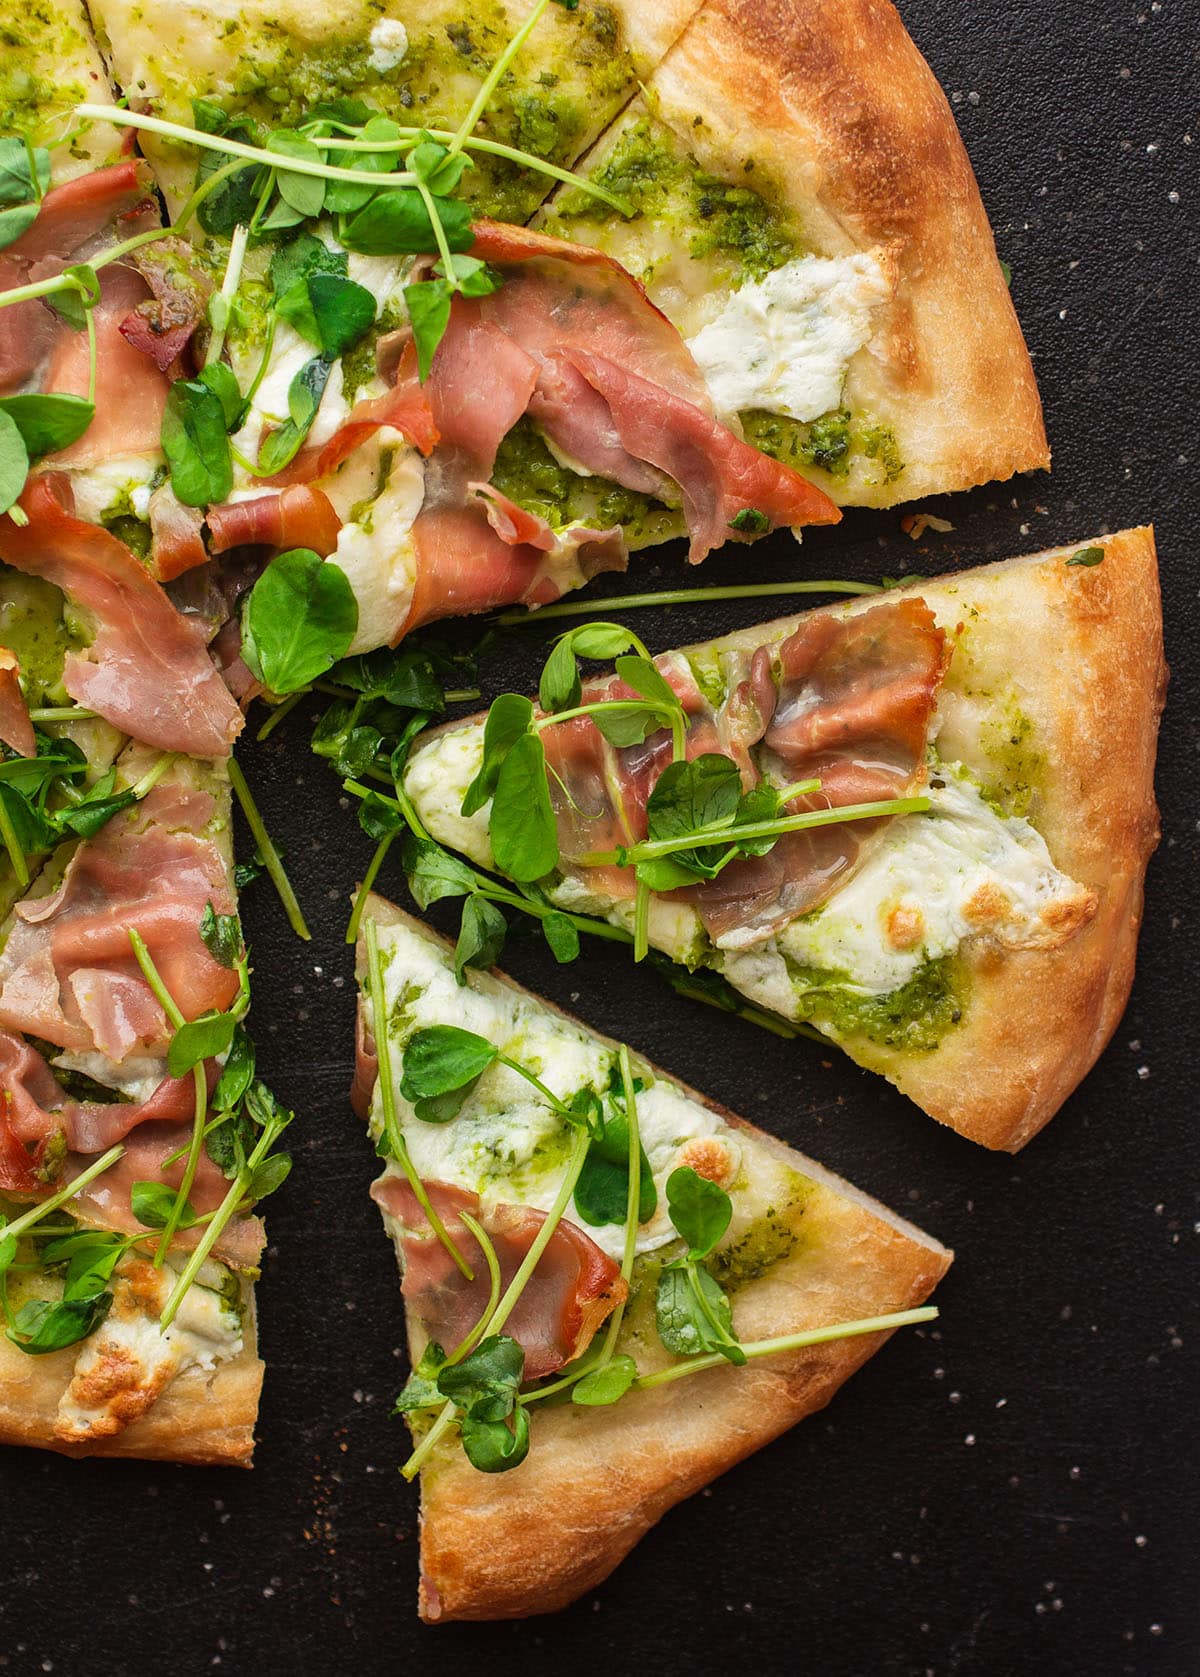 Slices of pea shoot pizza on a black cutting board.